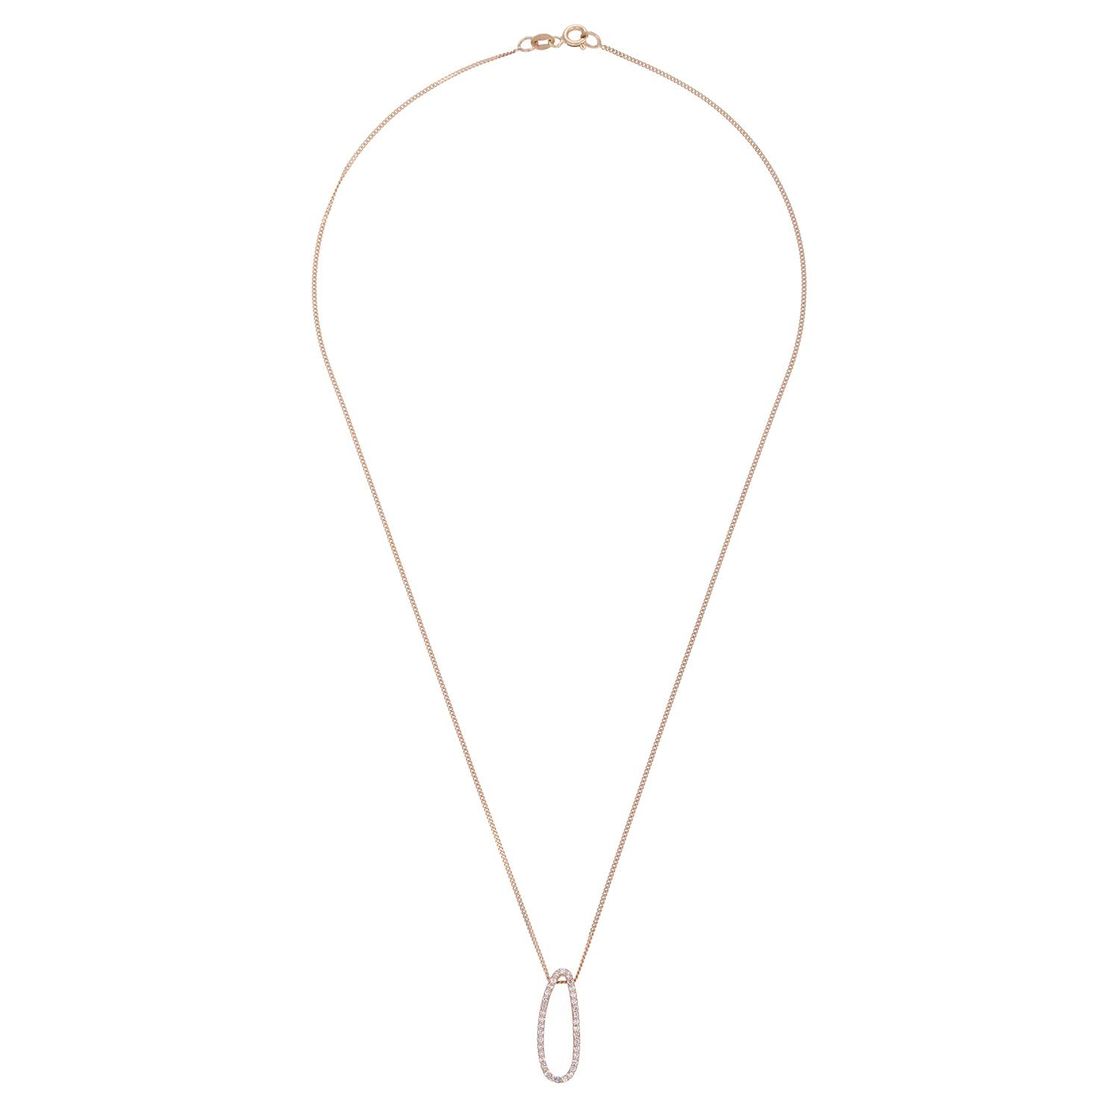 Drop Gold Necklace with Diamond Stones